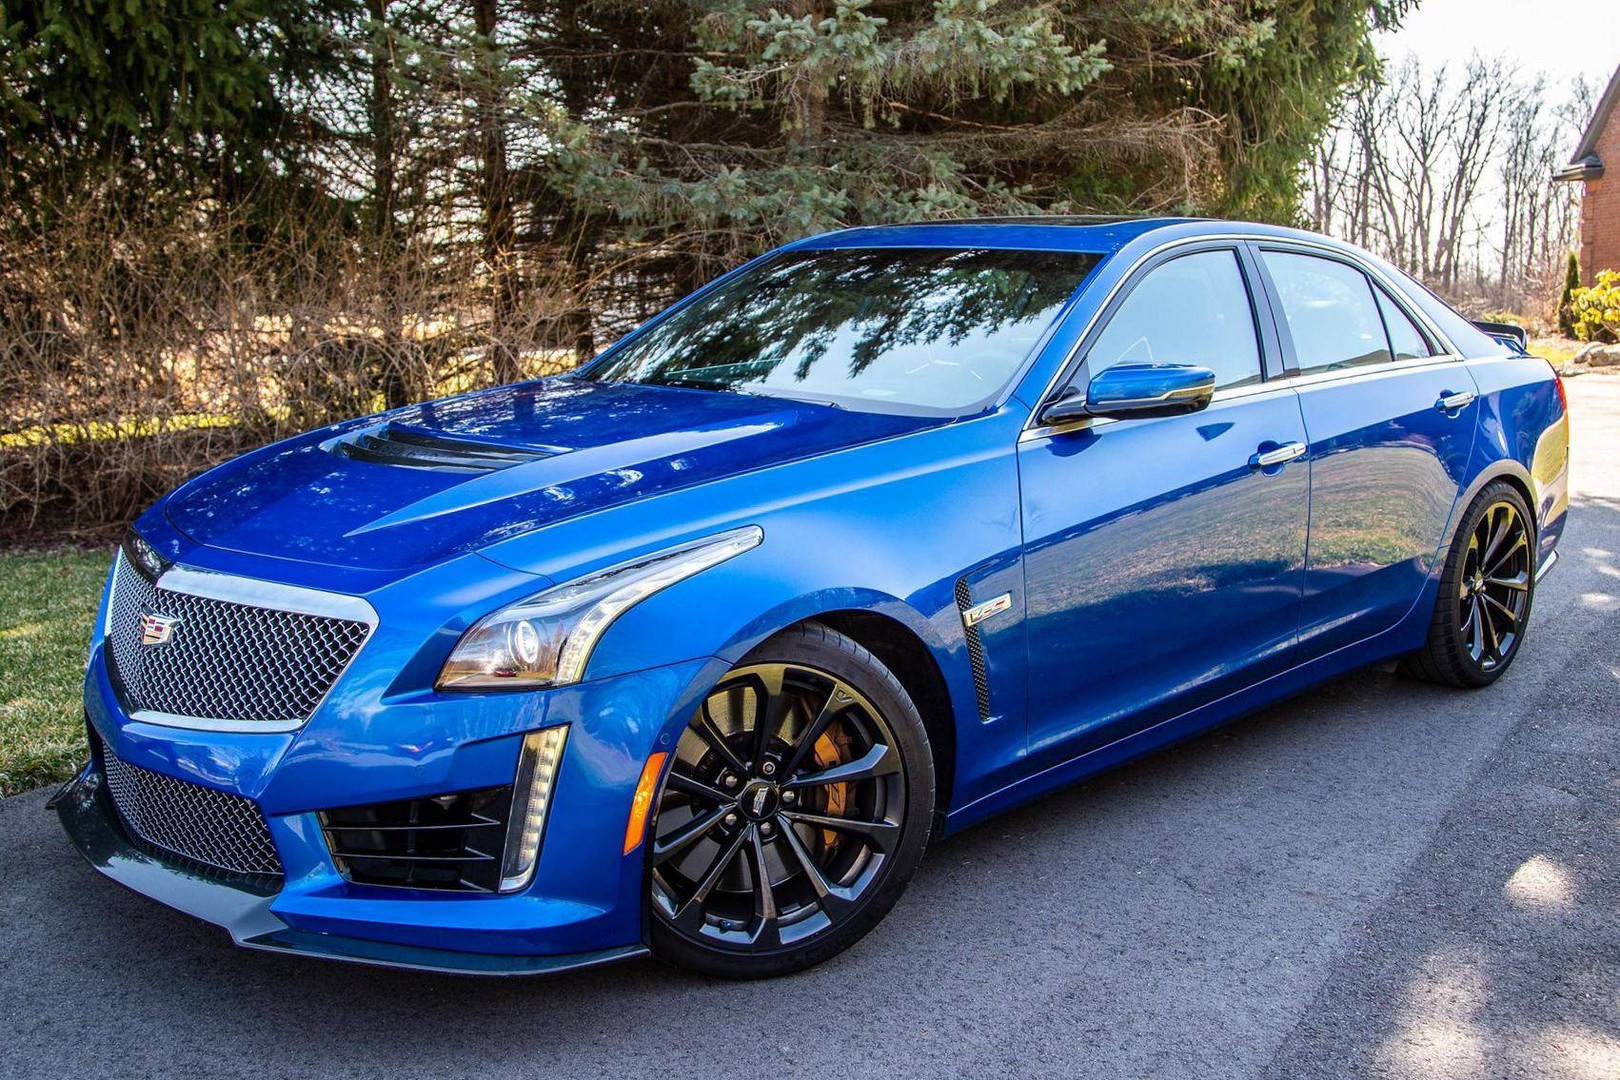 One-Owner 2018 Cadillac CTS-V Is a Supercharged 4-Door Beast With a Rare Color - autoevolution